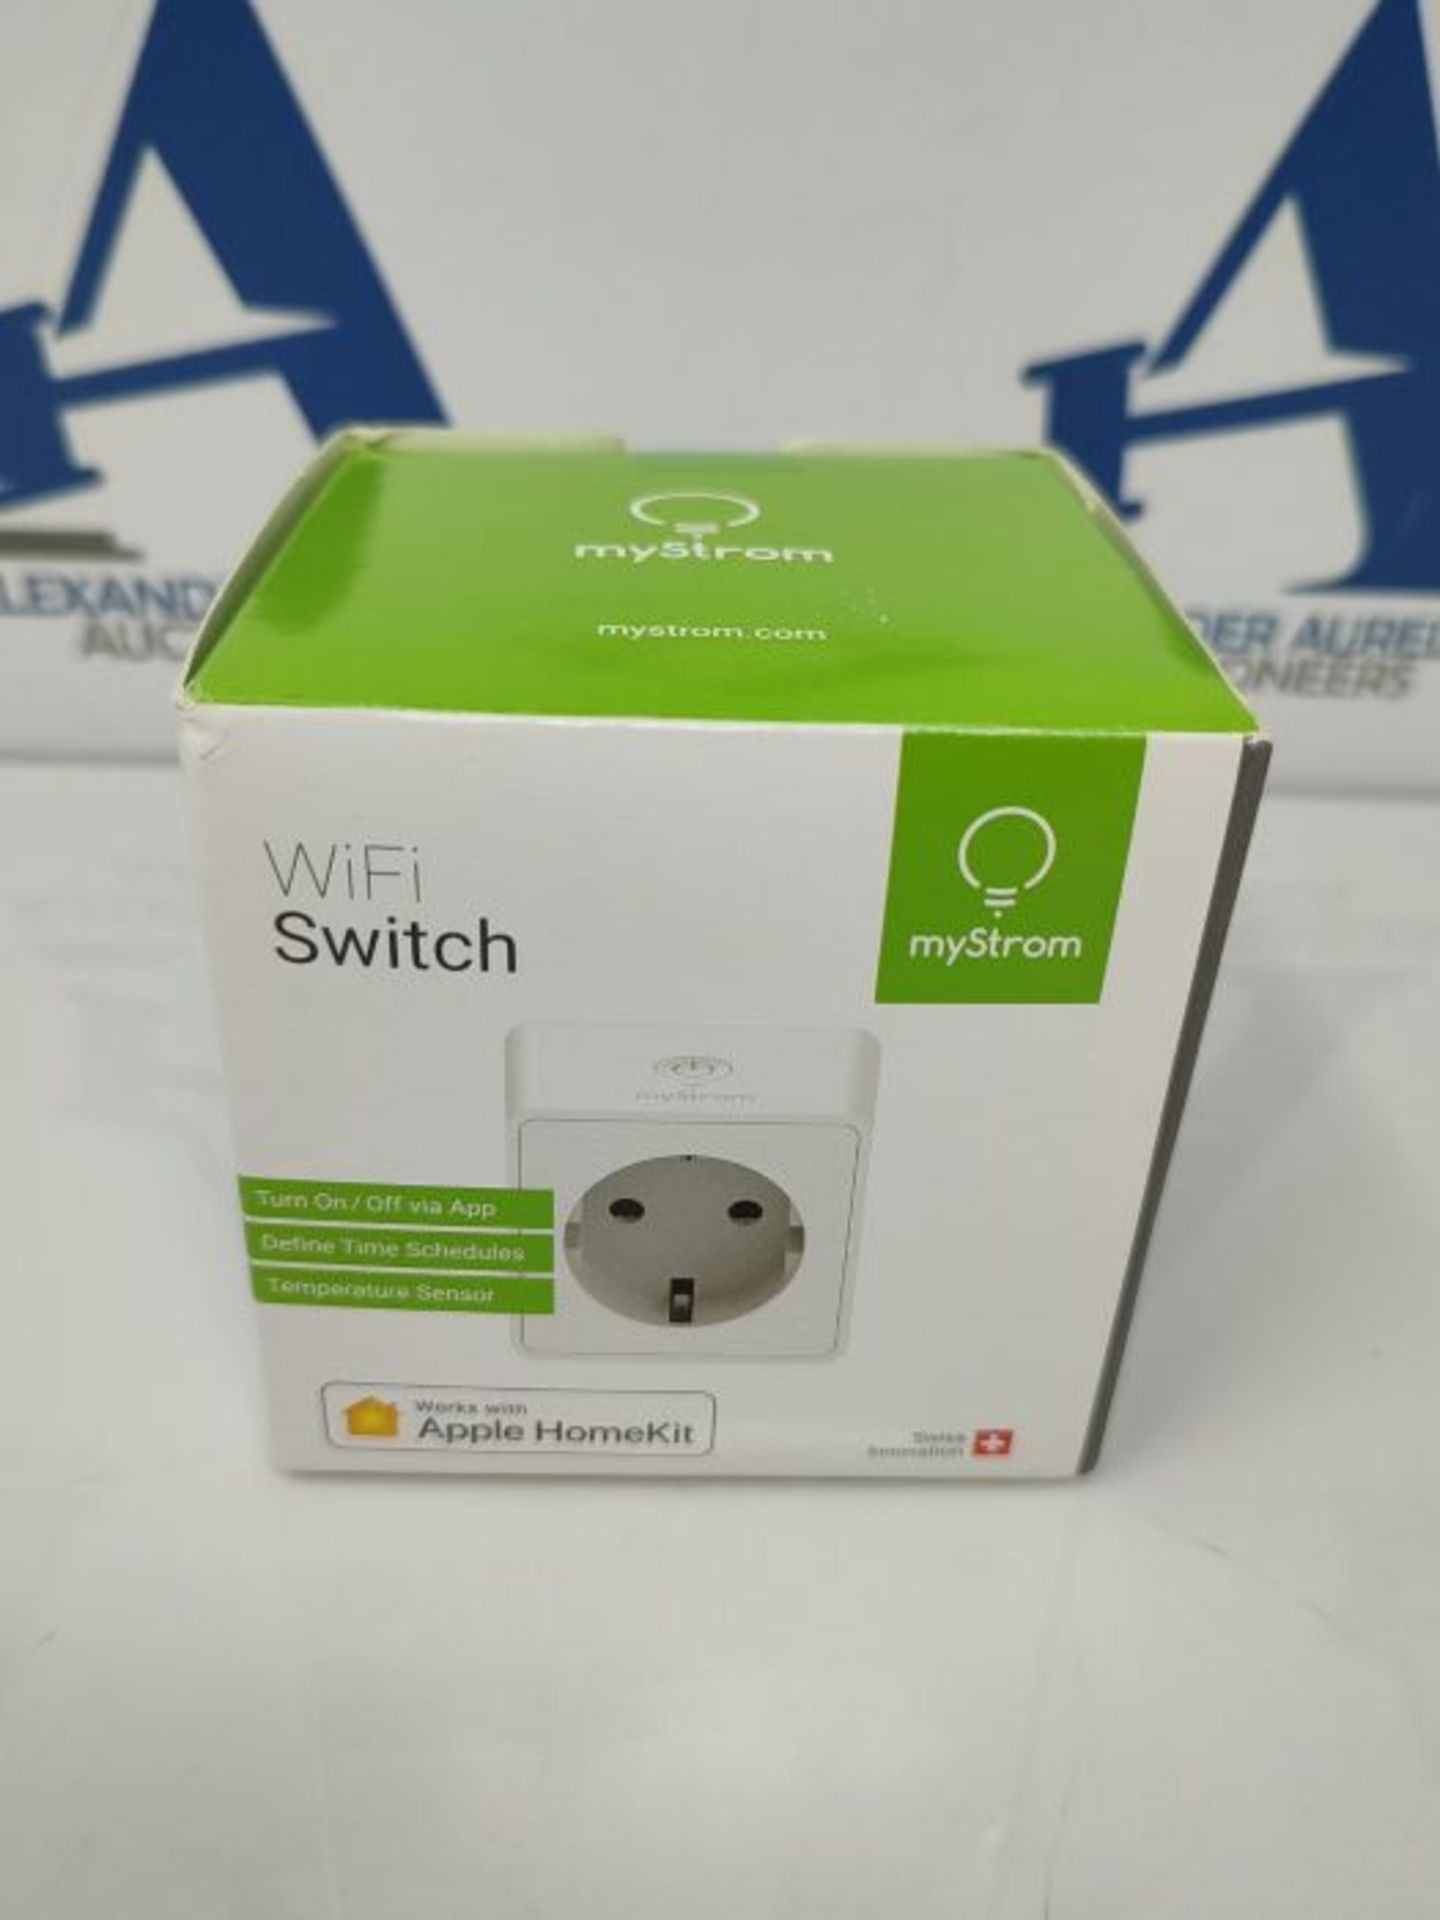 myStrom WiFi switch, switch, switch, power consumption and power generation of mini PV